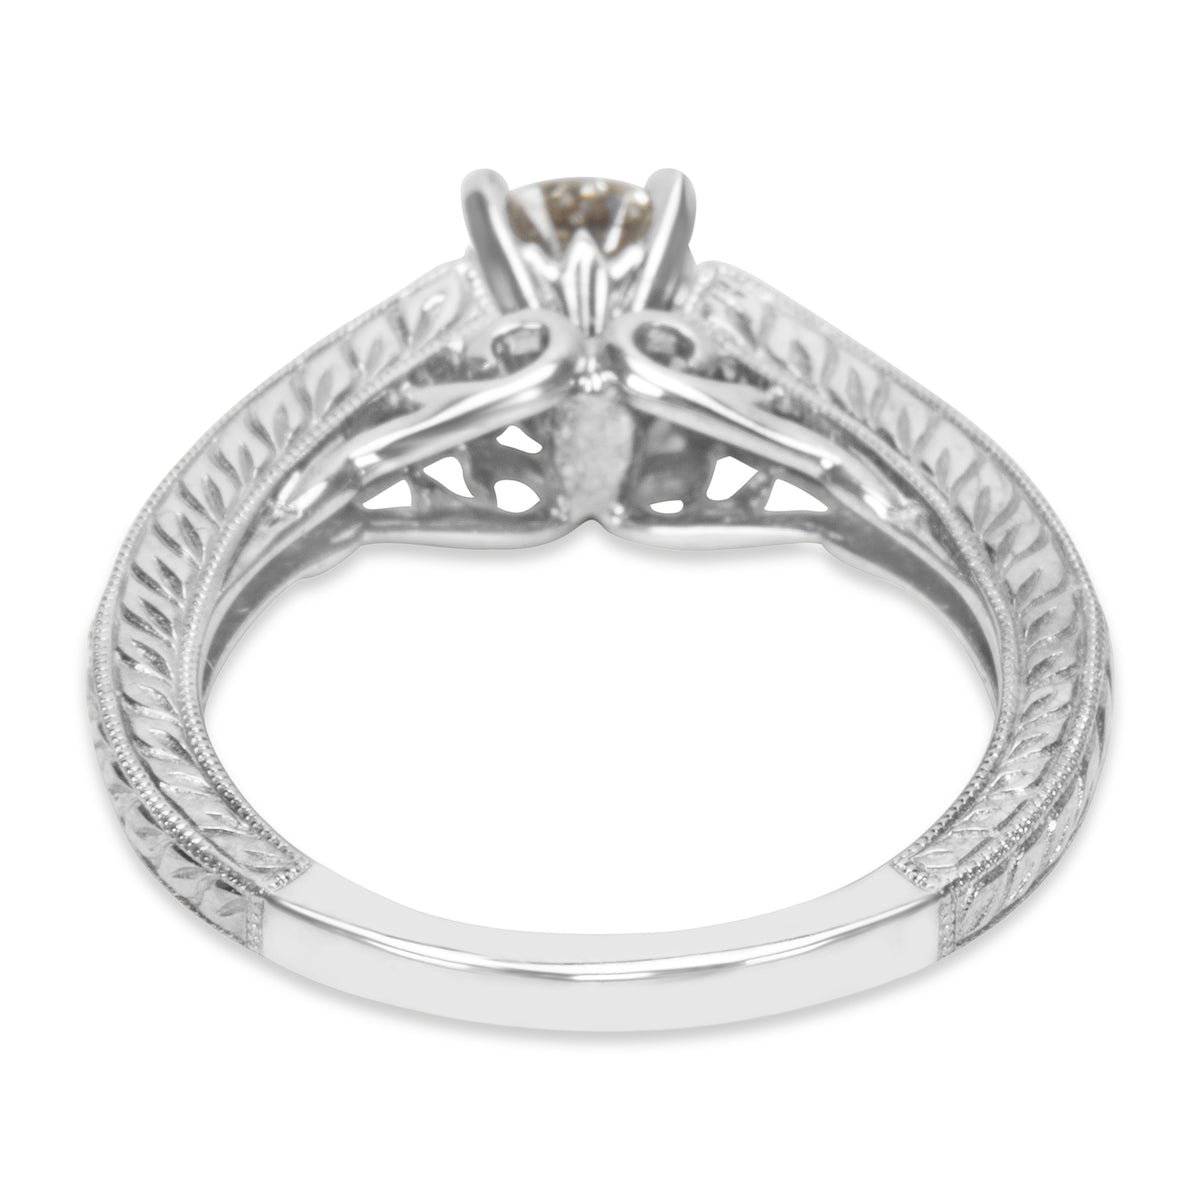 BRAND NEW Diamond Engagement Ring in 14K White Gold L-M SI2 (0.95 CTW)